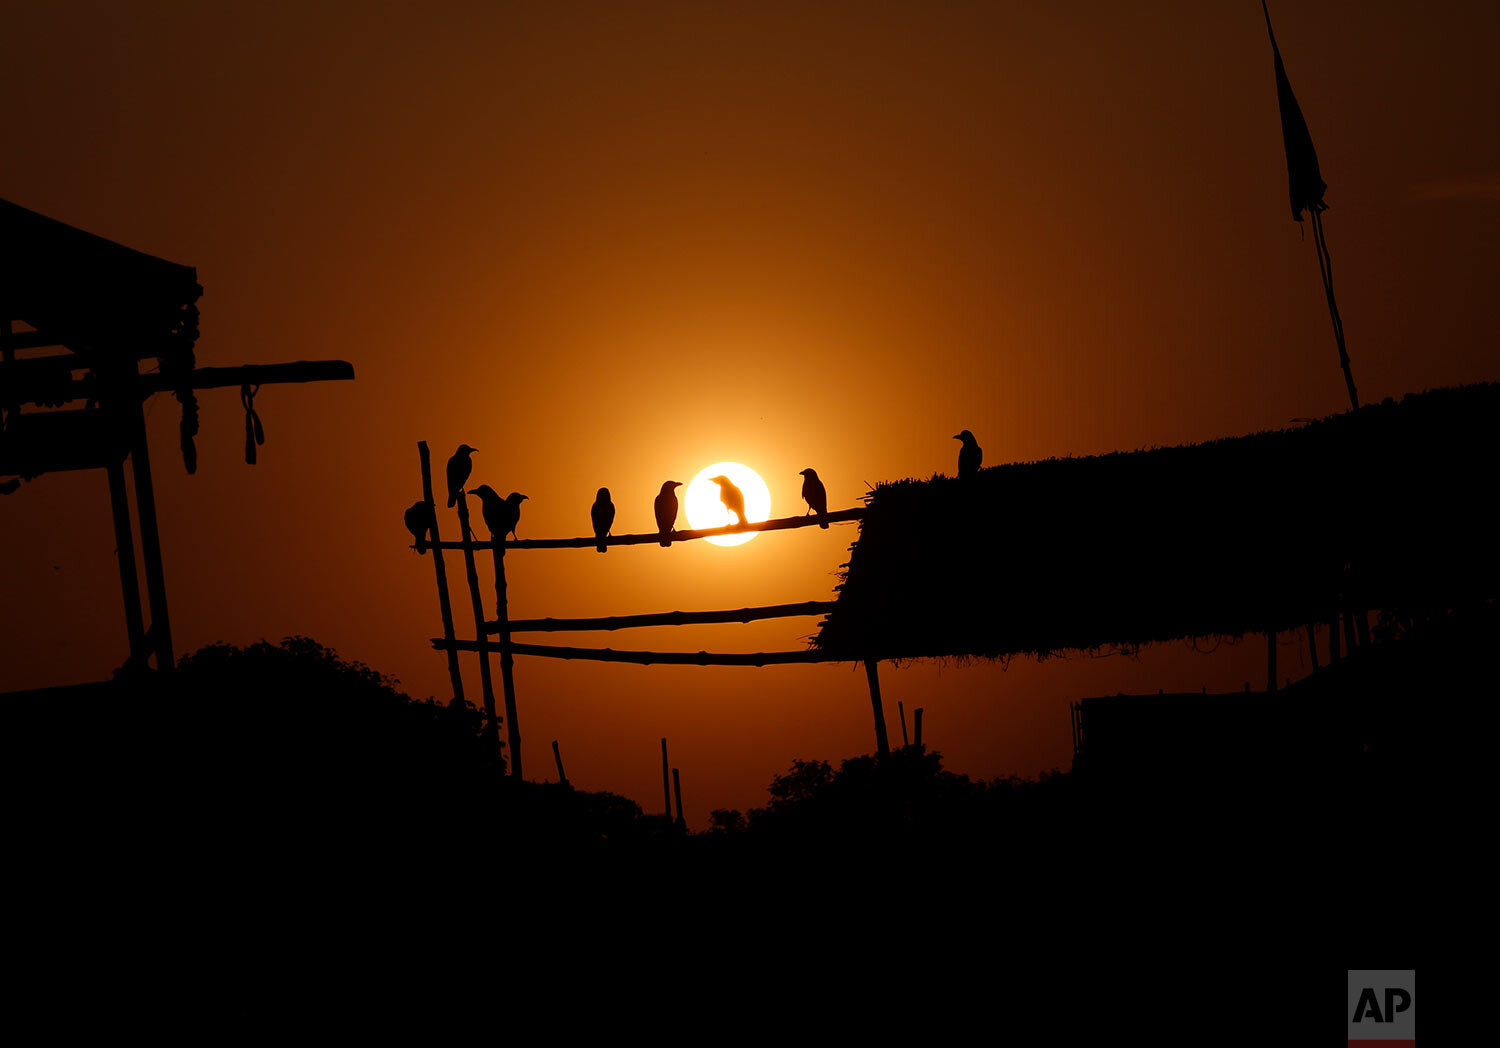  Crows sitting on a pole are silhouetted against setting sun during lockdown to control the spread of the coronavirus in Prayagraj, India, Tuesday, April 21, 2020.  (AP Photo/Rajesh Kumar Singh) 